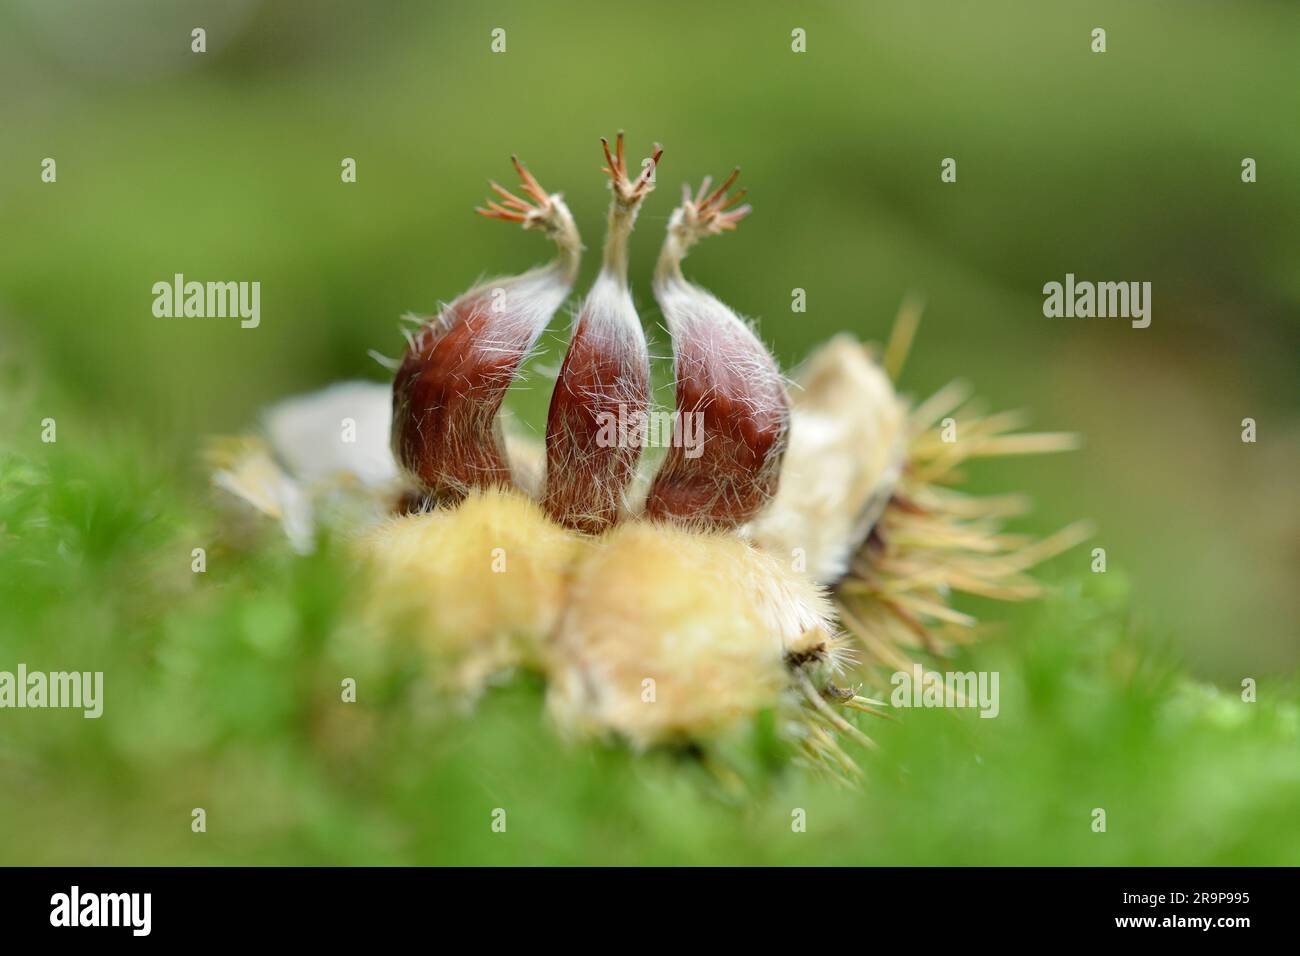 Sweet Chestnut (Castanea sativa) close-up of fallen fruits / nuts, photographed from a low angle on woodland floor beneath tree, Scotland Stock Photo